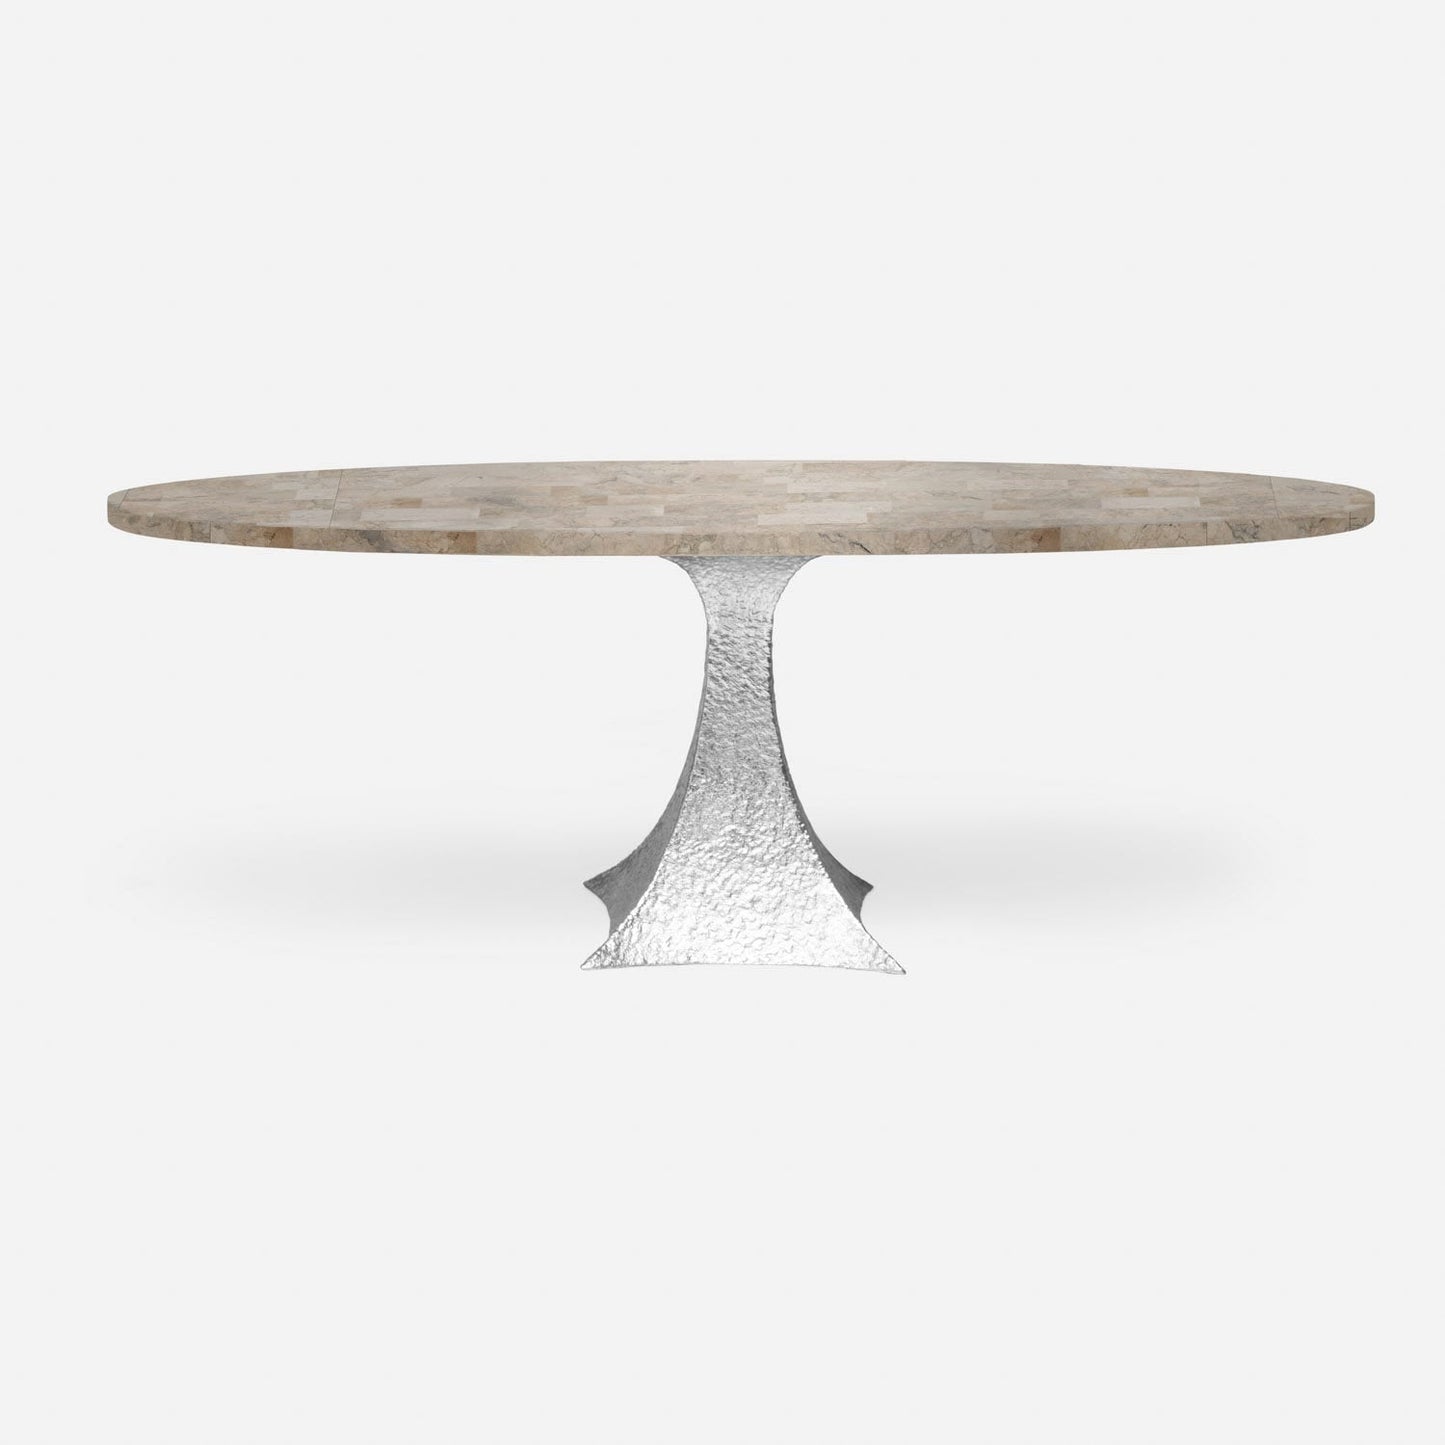 Made Goods Noor 96" x 44" x 30" Double Base Bumpy Cool Silver Iron Dinning Table With Oval Warm Gray Marble Table Top